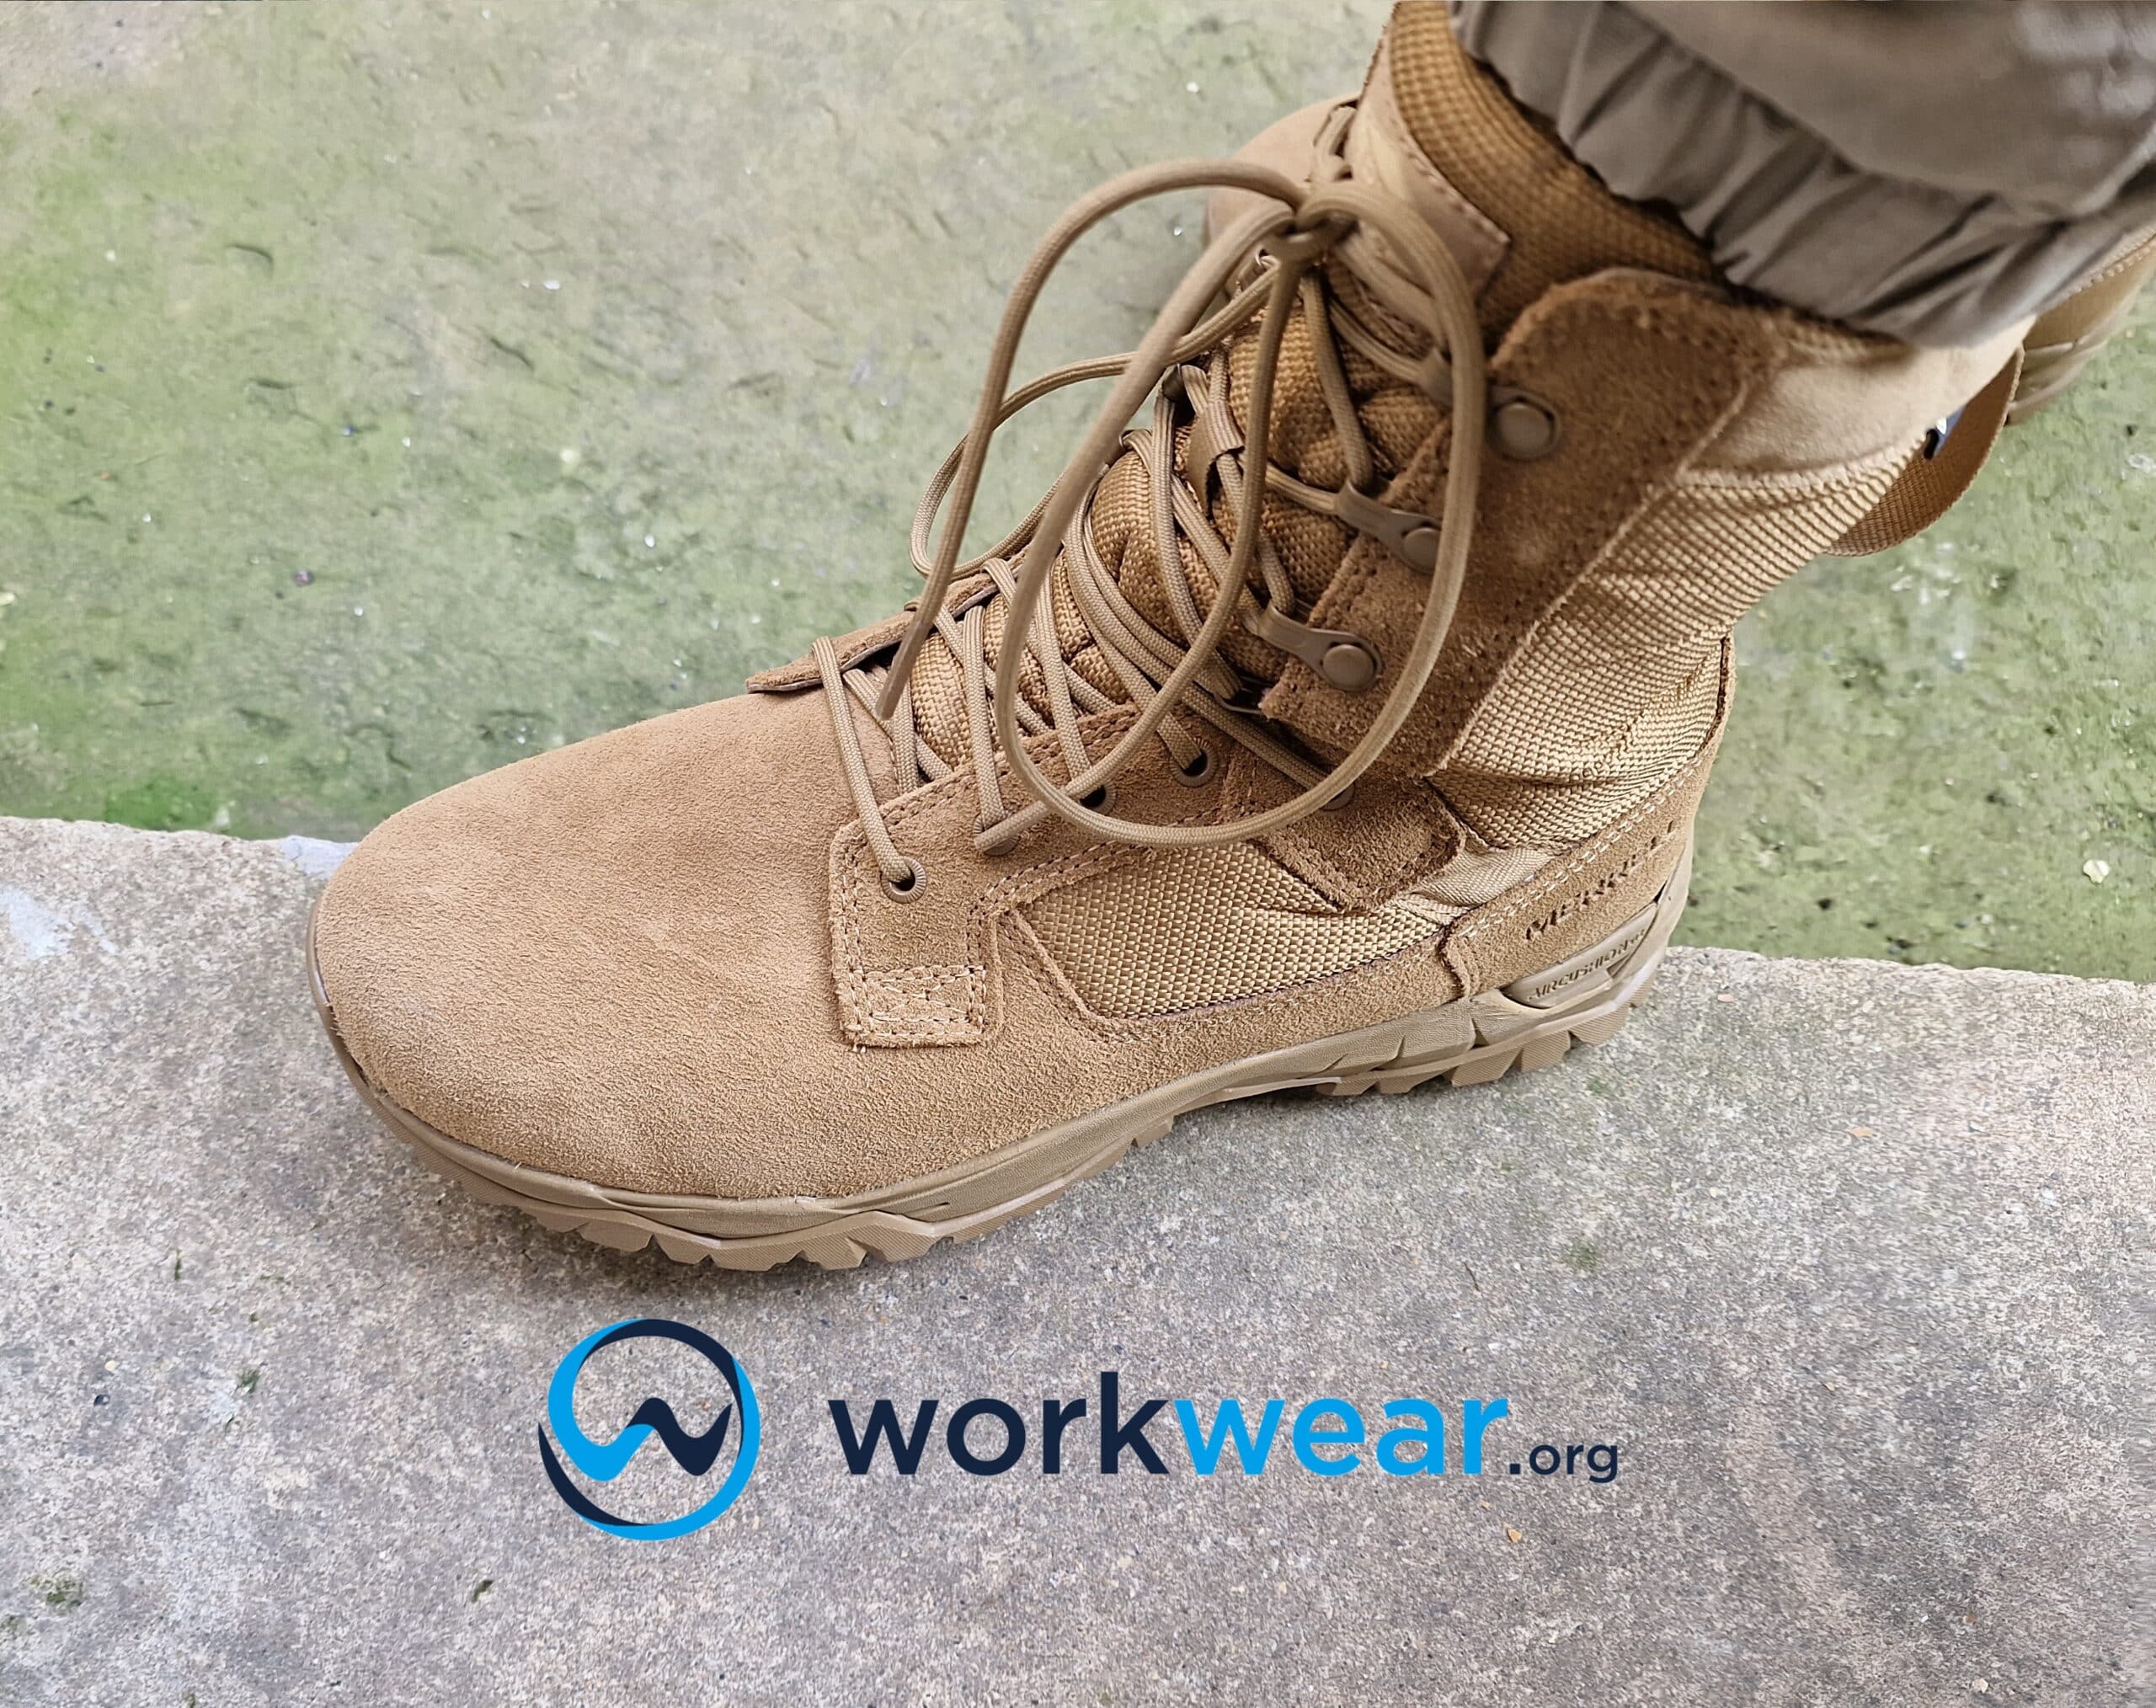 Merrell MQC 2 Thermo GORE-TEX Boot – A Detailed Review | WorkWear.org